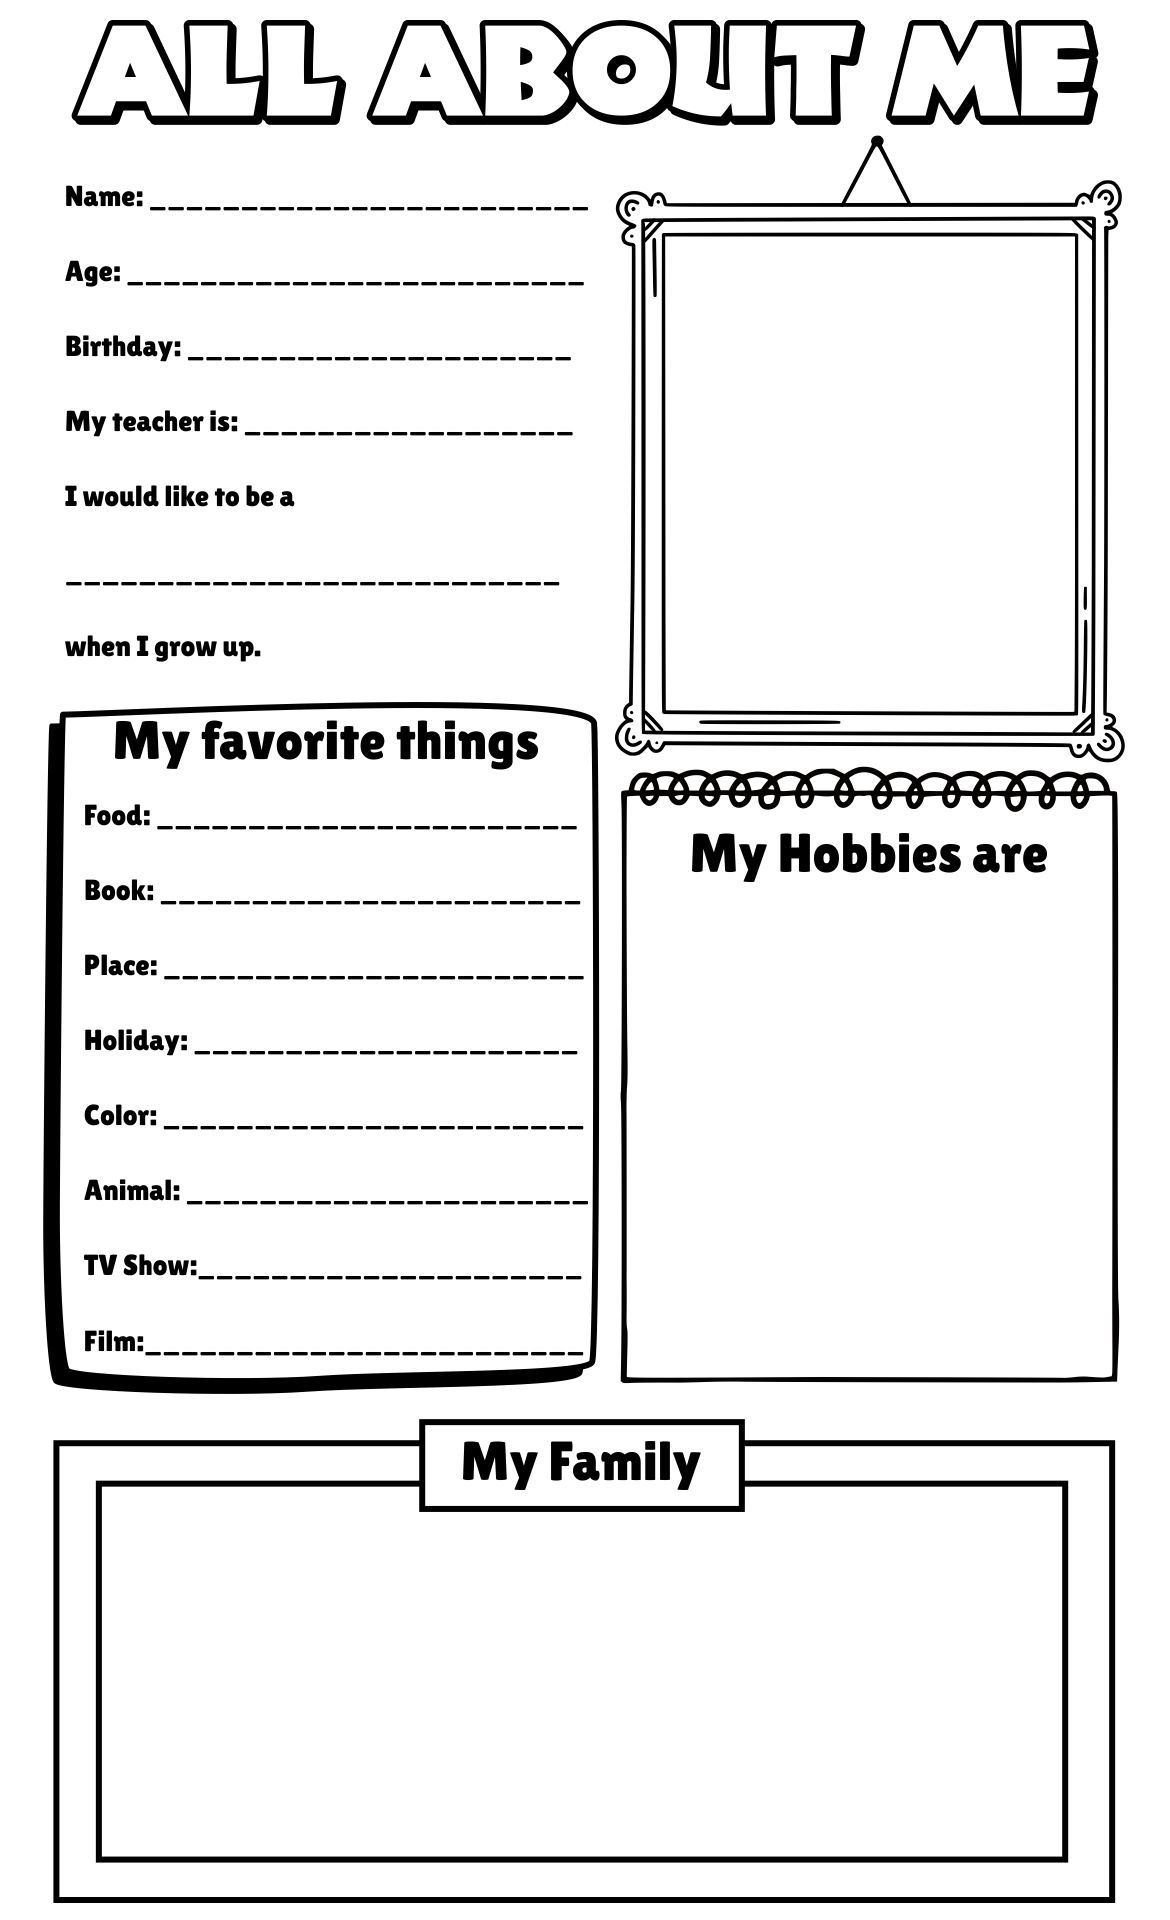 New Teacher All About Me Writing Frame Printable